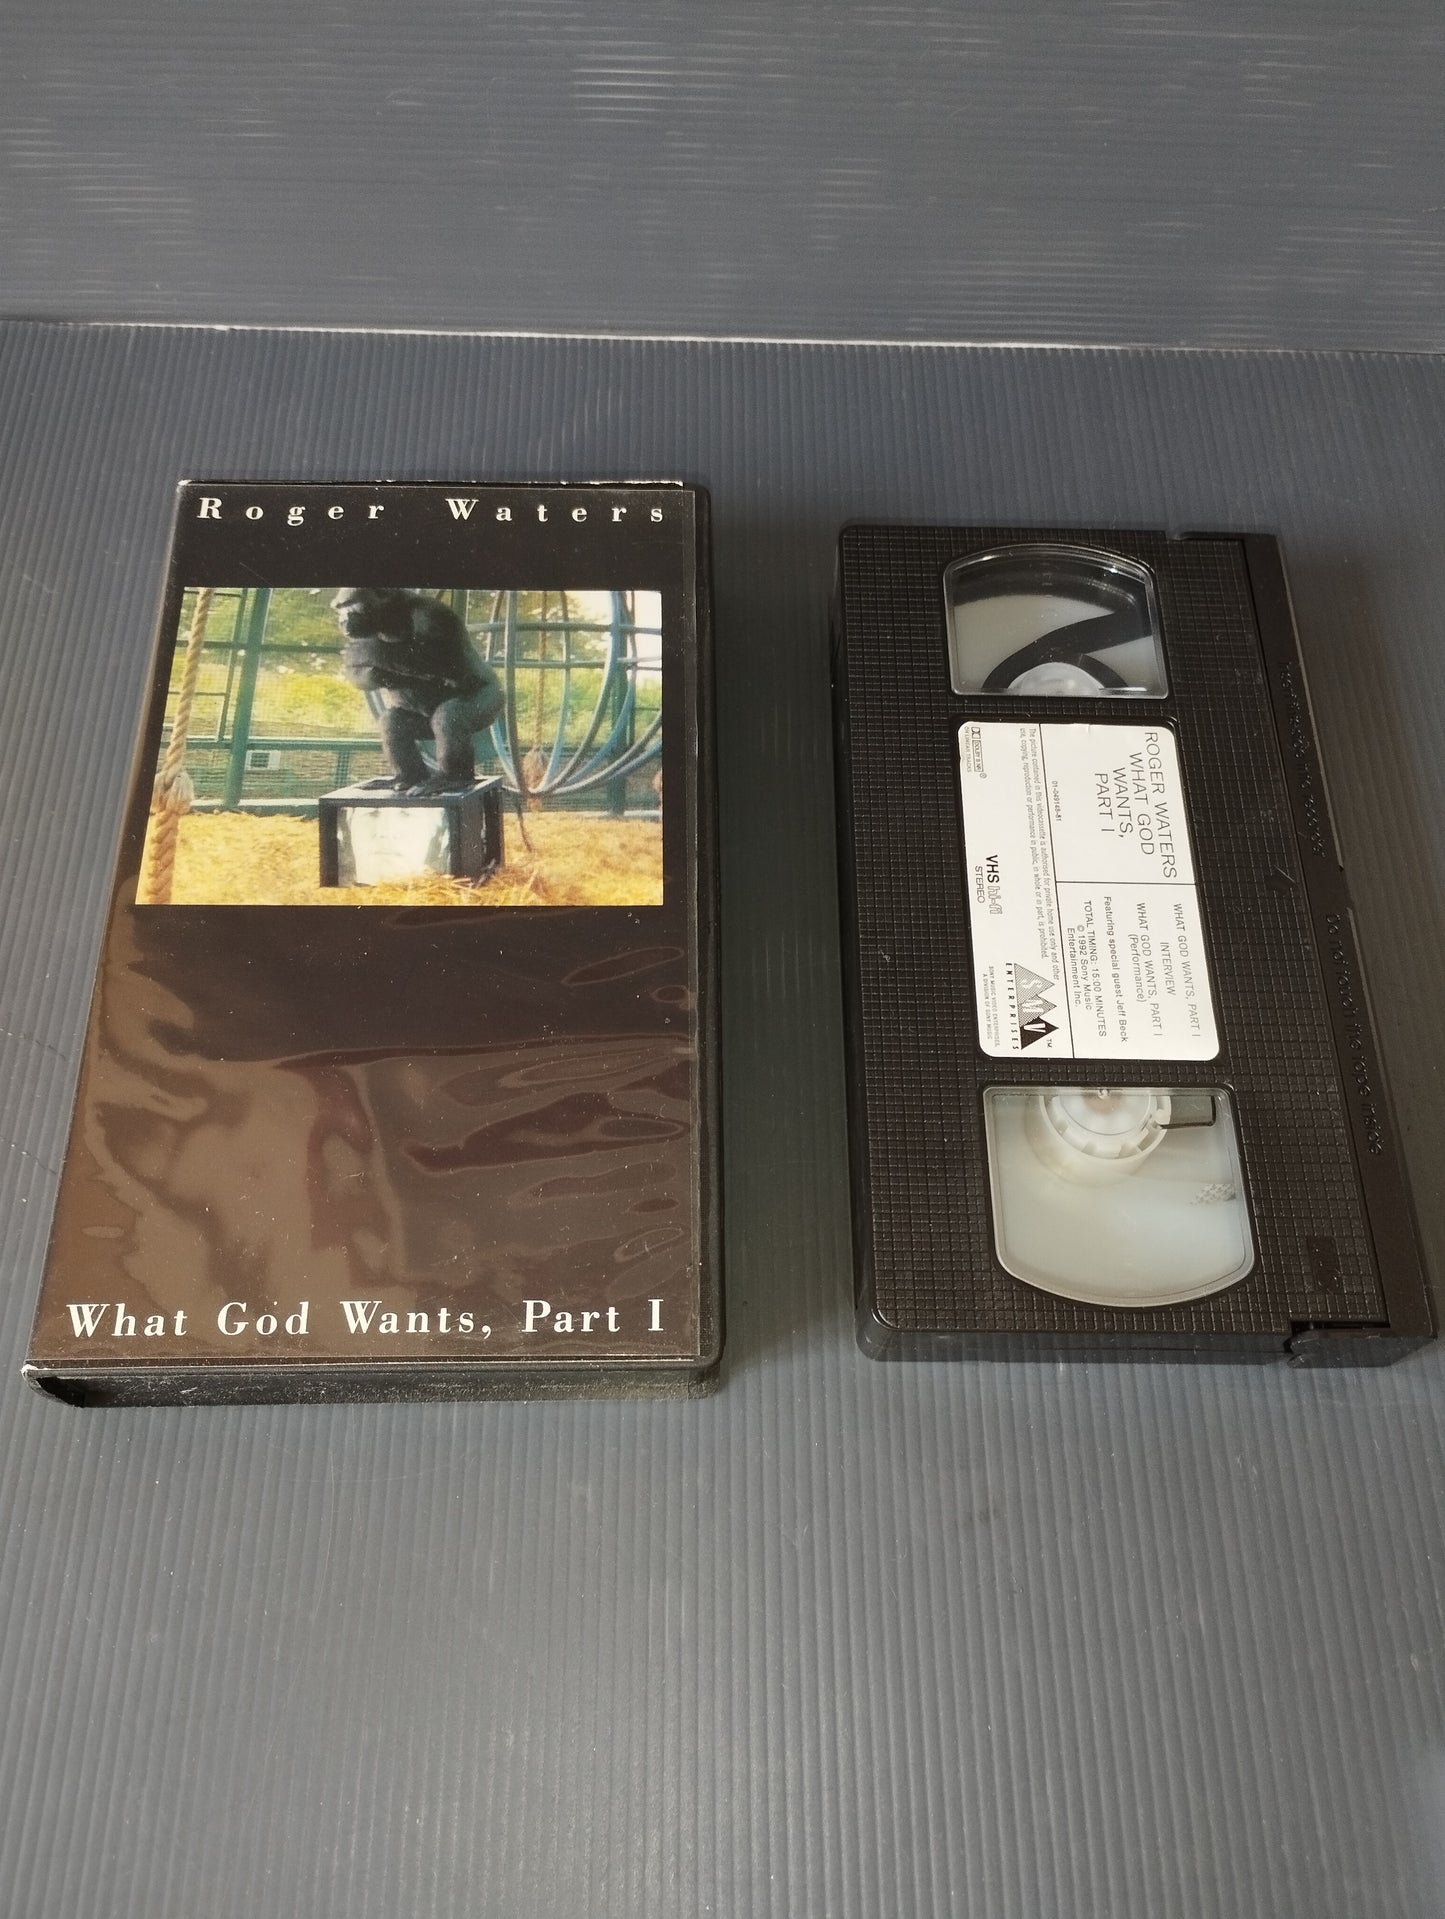 What God Wants, Part I" Roger Waters VHS
 Published in 1992 by Sony Music Entertainment